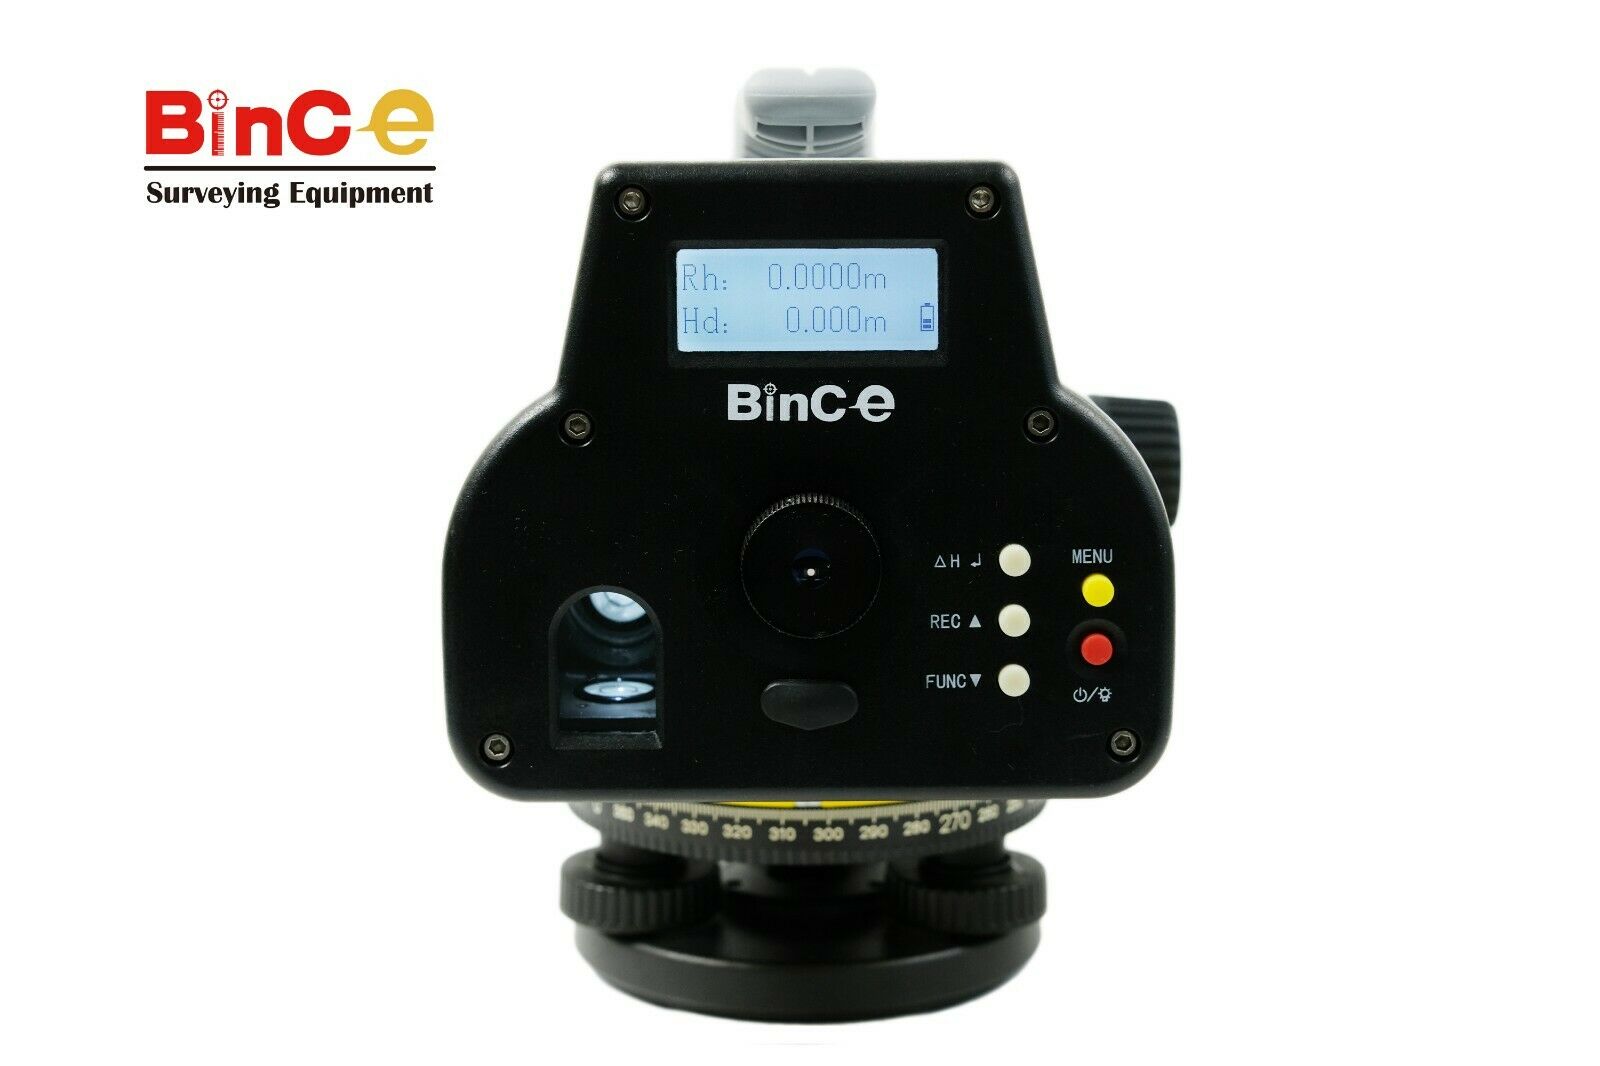 Bince DAL32 Digital Electronic Level with Memory with Two Leveling Barcode Staff